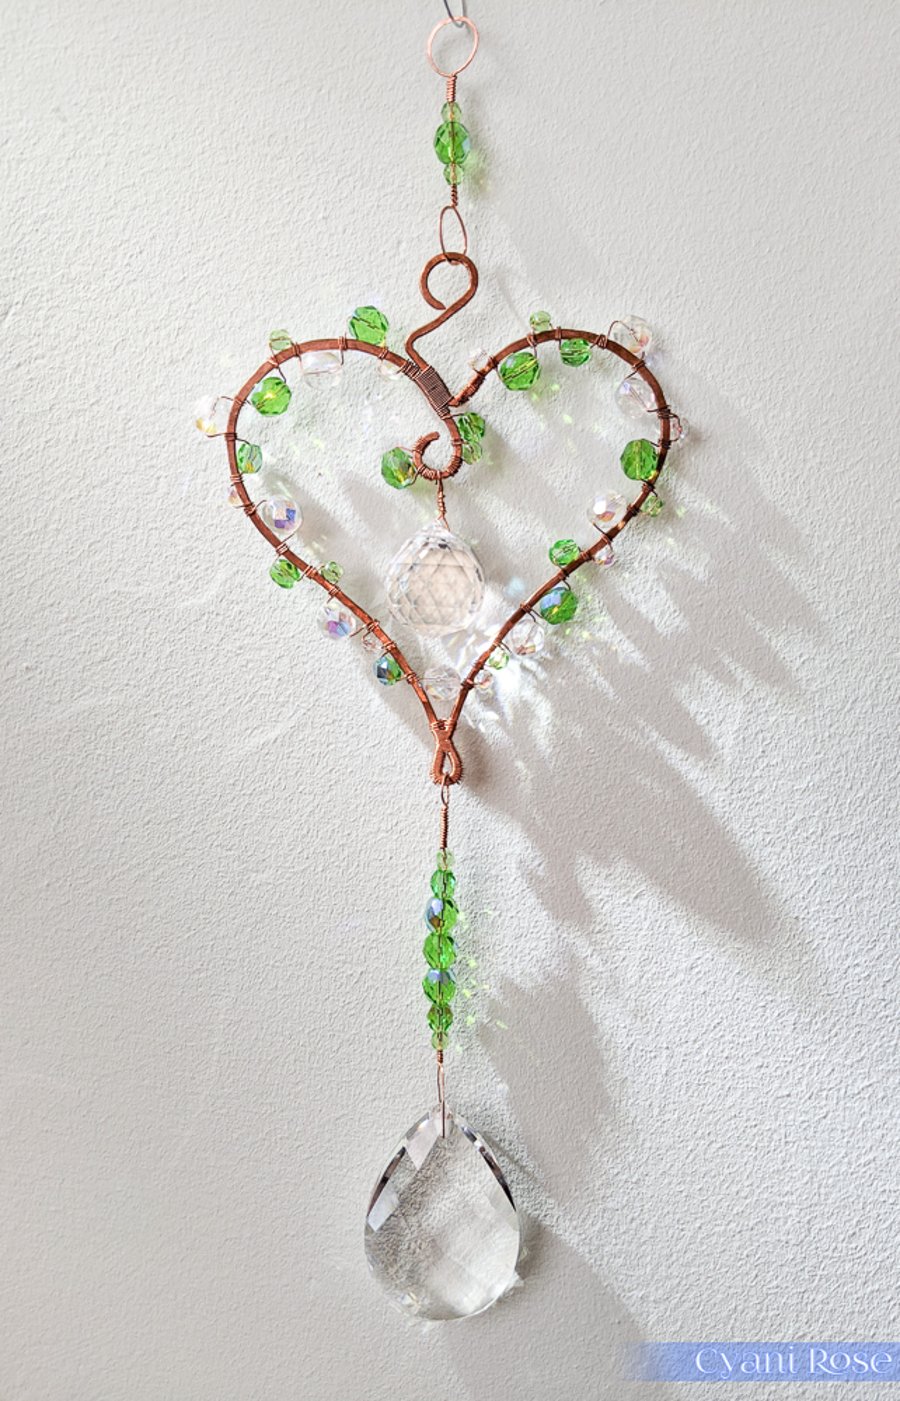 Sun catcher stunning heart shaped design with 2 sparkly prisms and glass beads